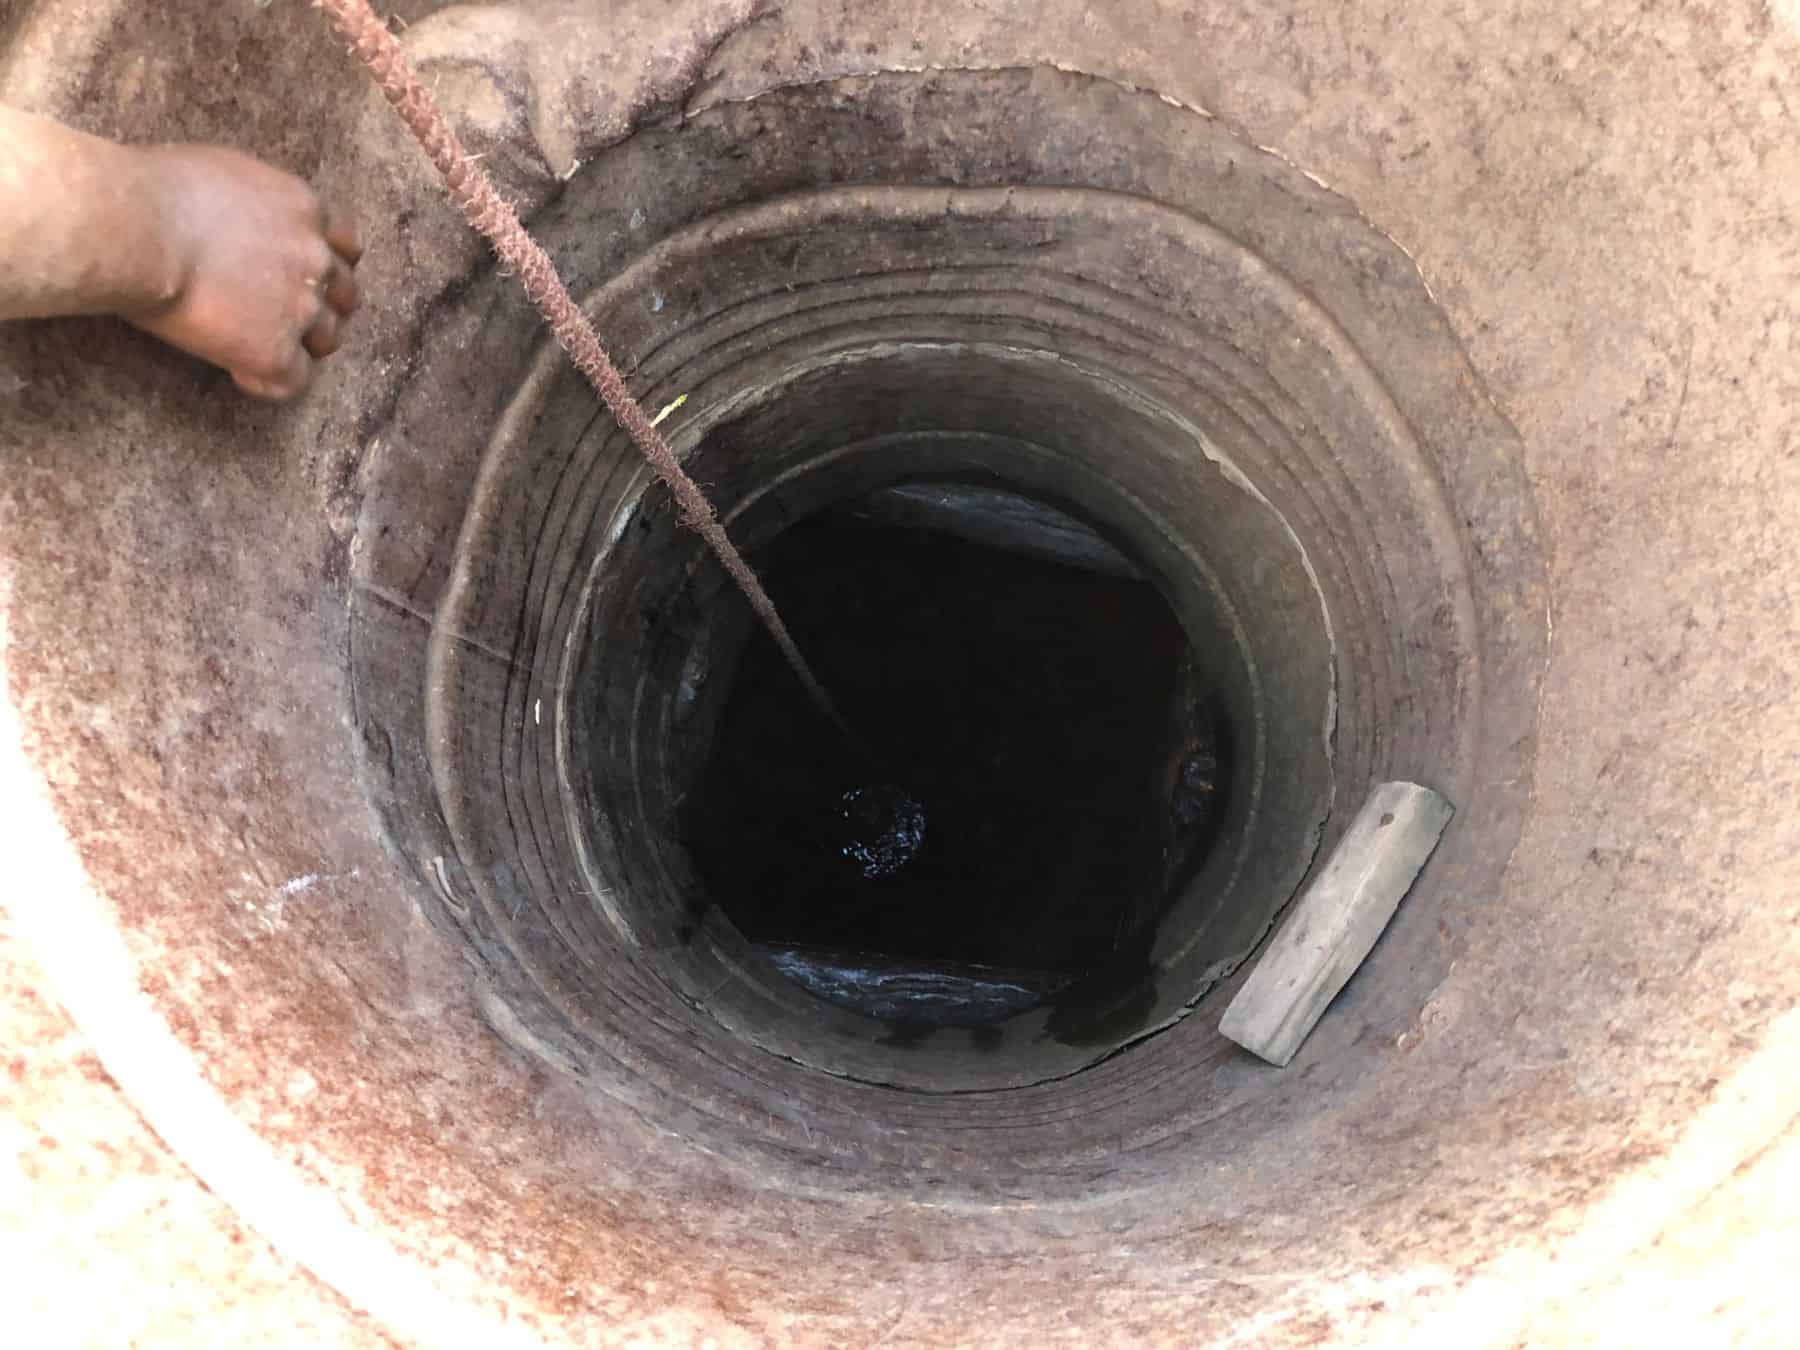 The unfiltered water from Dinake Hussan’s well often left him and his family so sick they couldn’t work or go to school